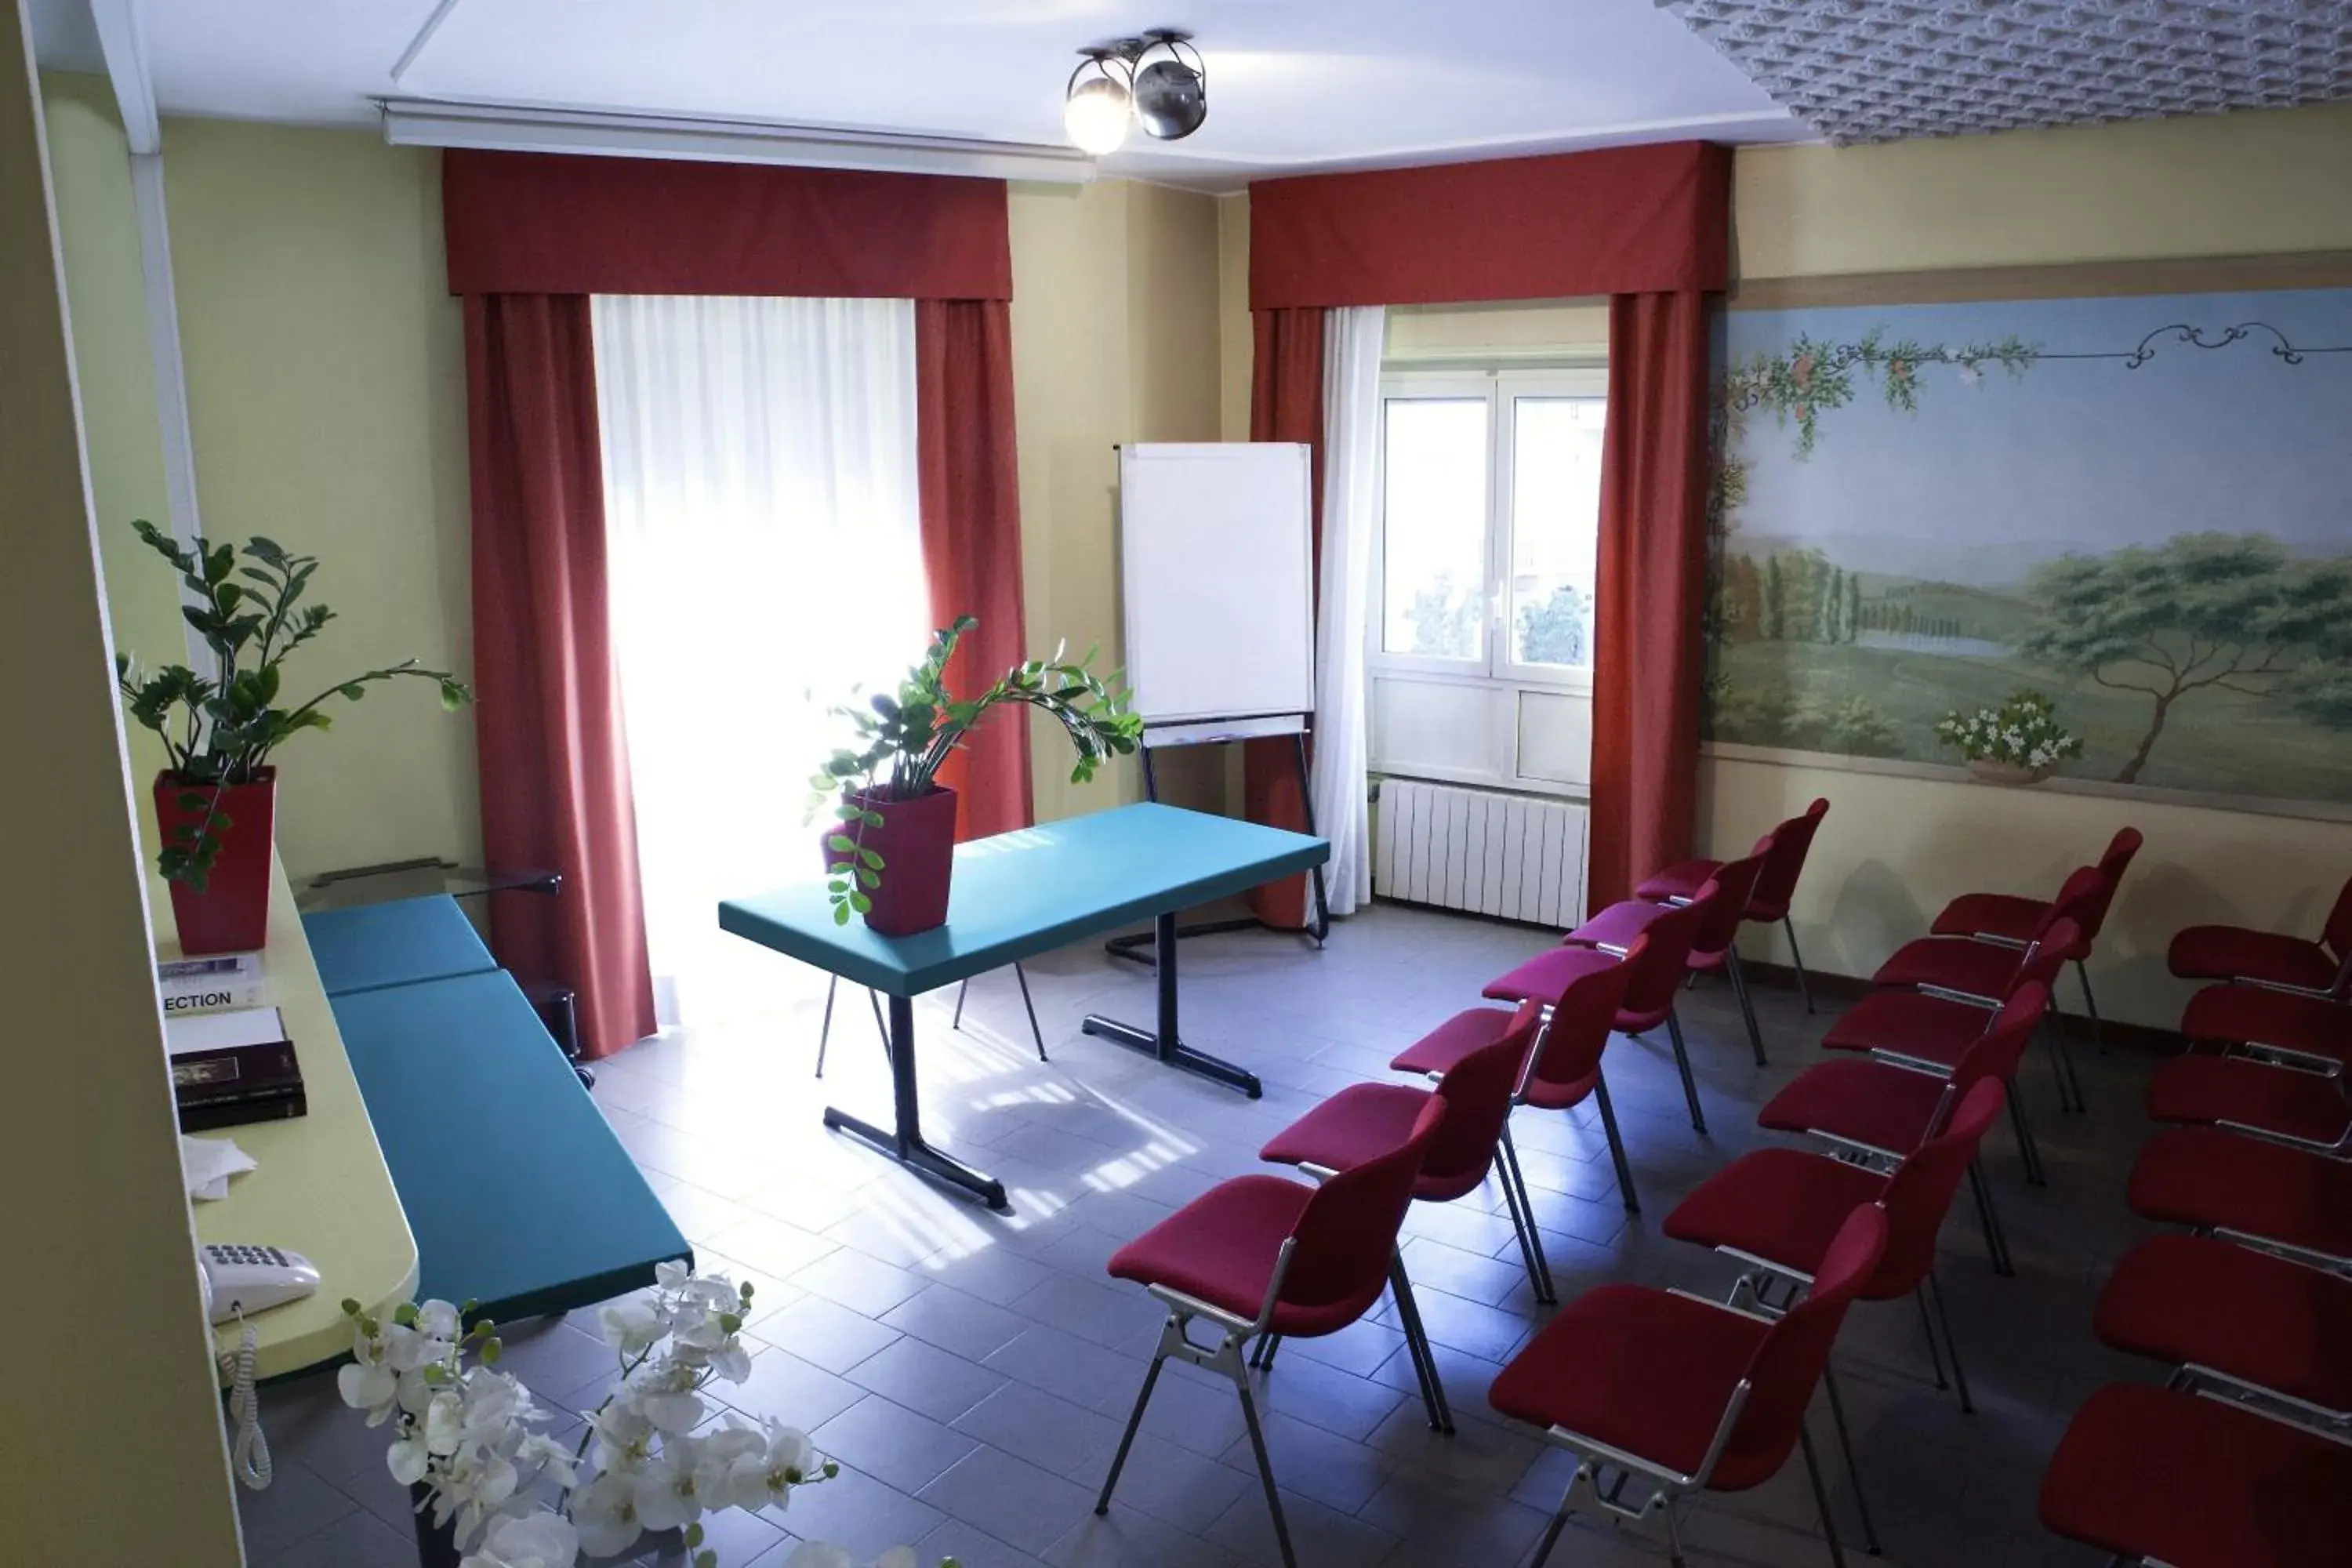 Meeting/conference room in Hotel Mennini